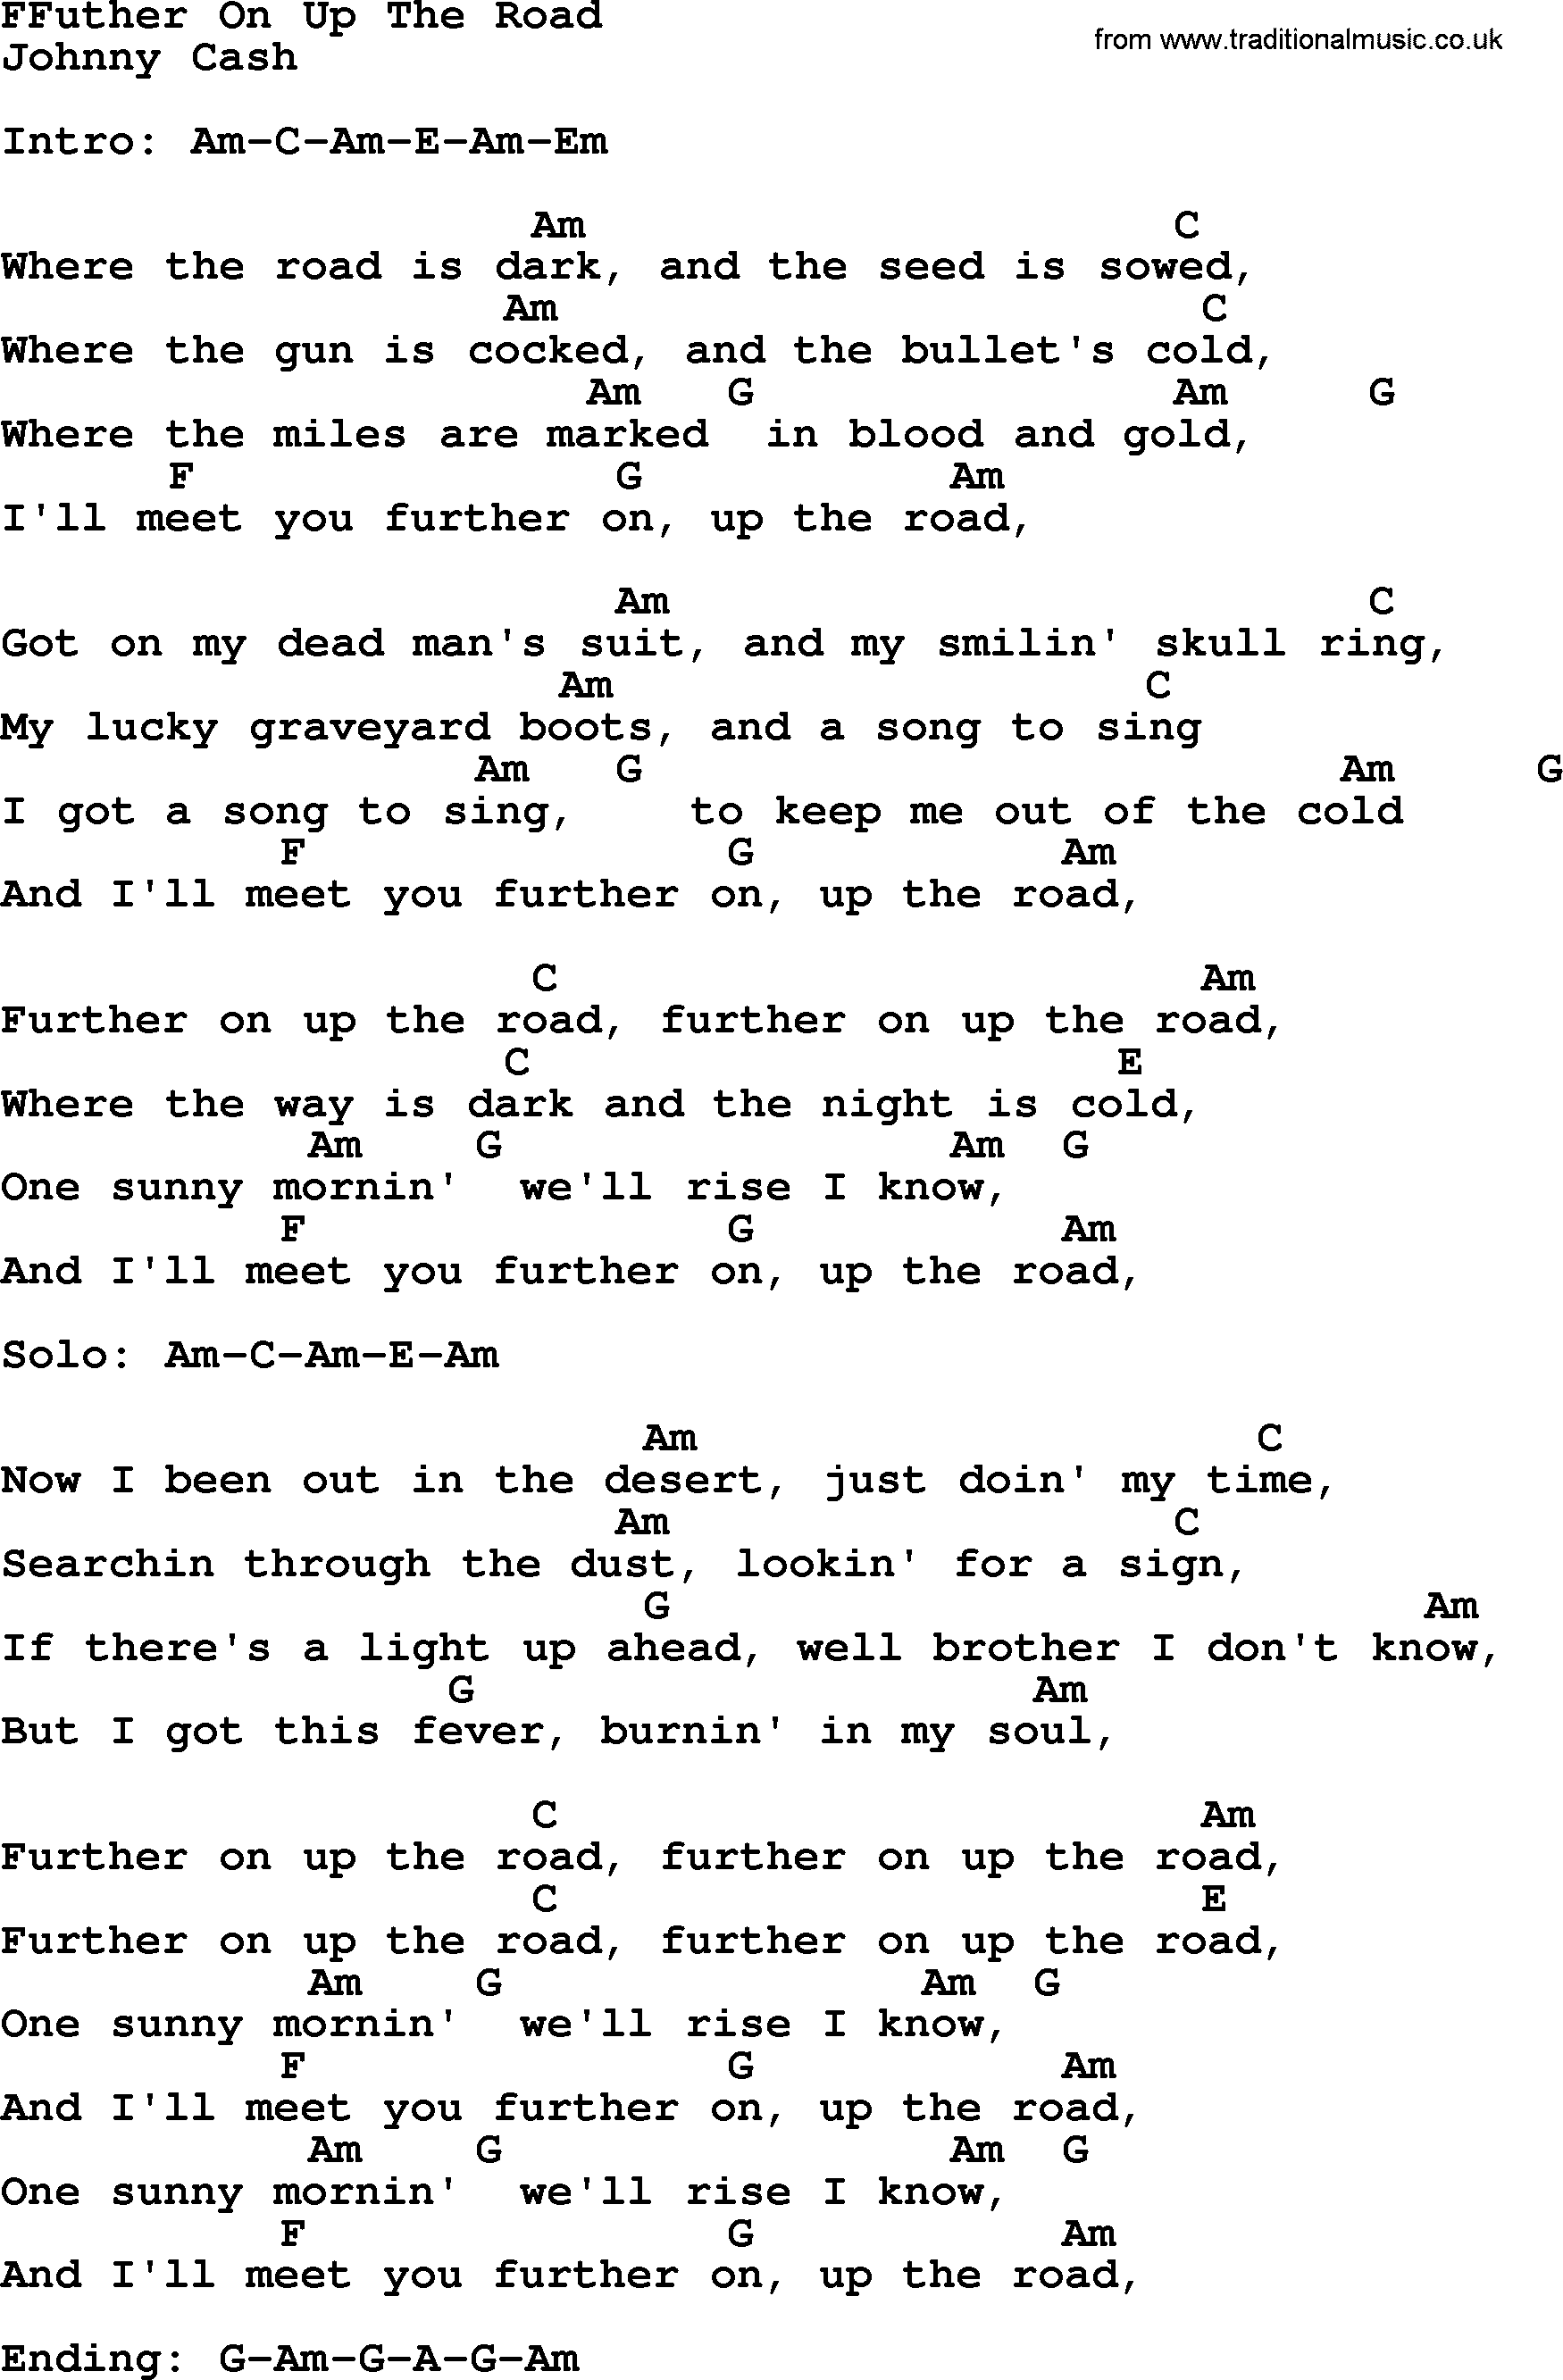 Johnny Cash song Futher On Up The Road(3), lyrics and chords